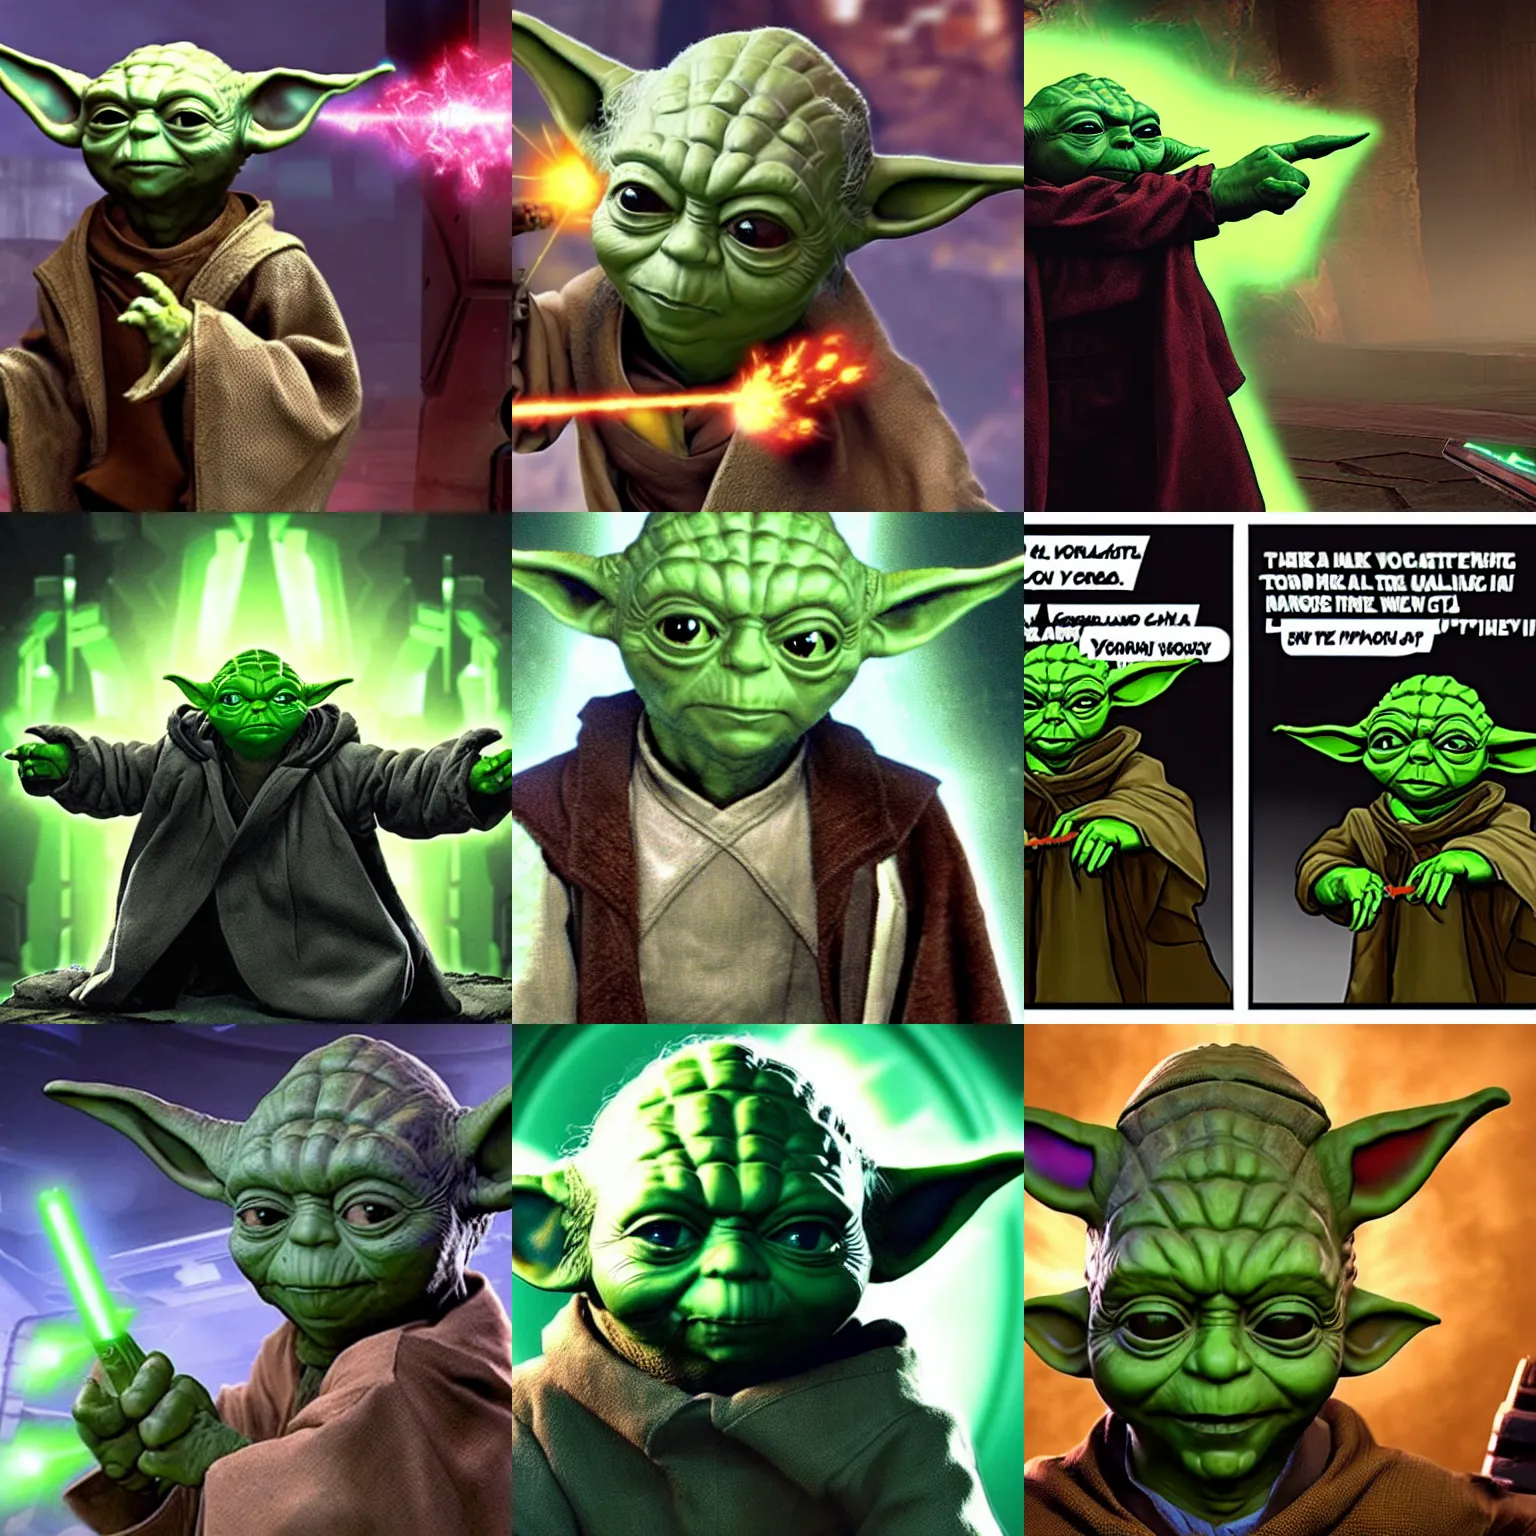 Prompt: yoda as endgame boss in the video game doom